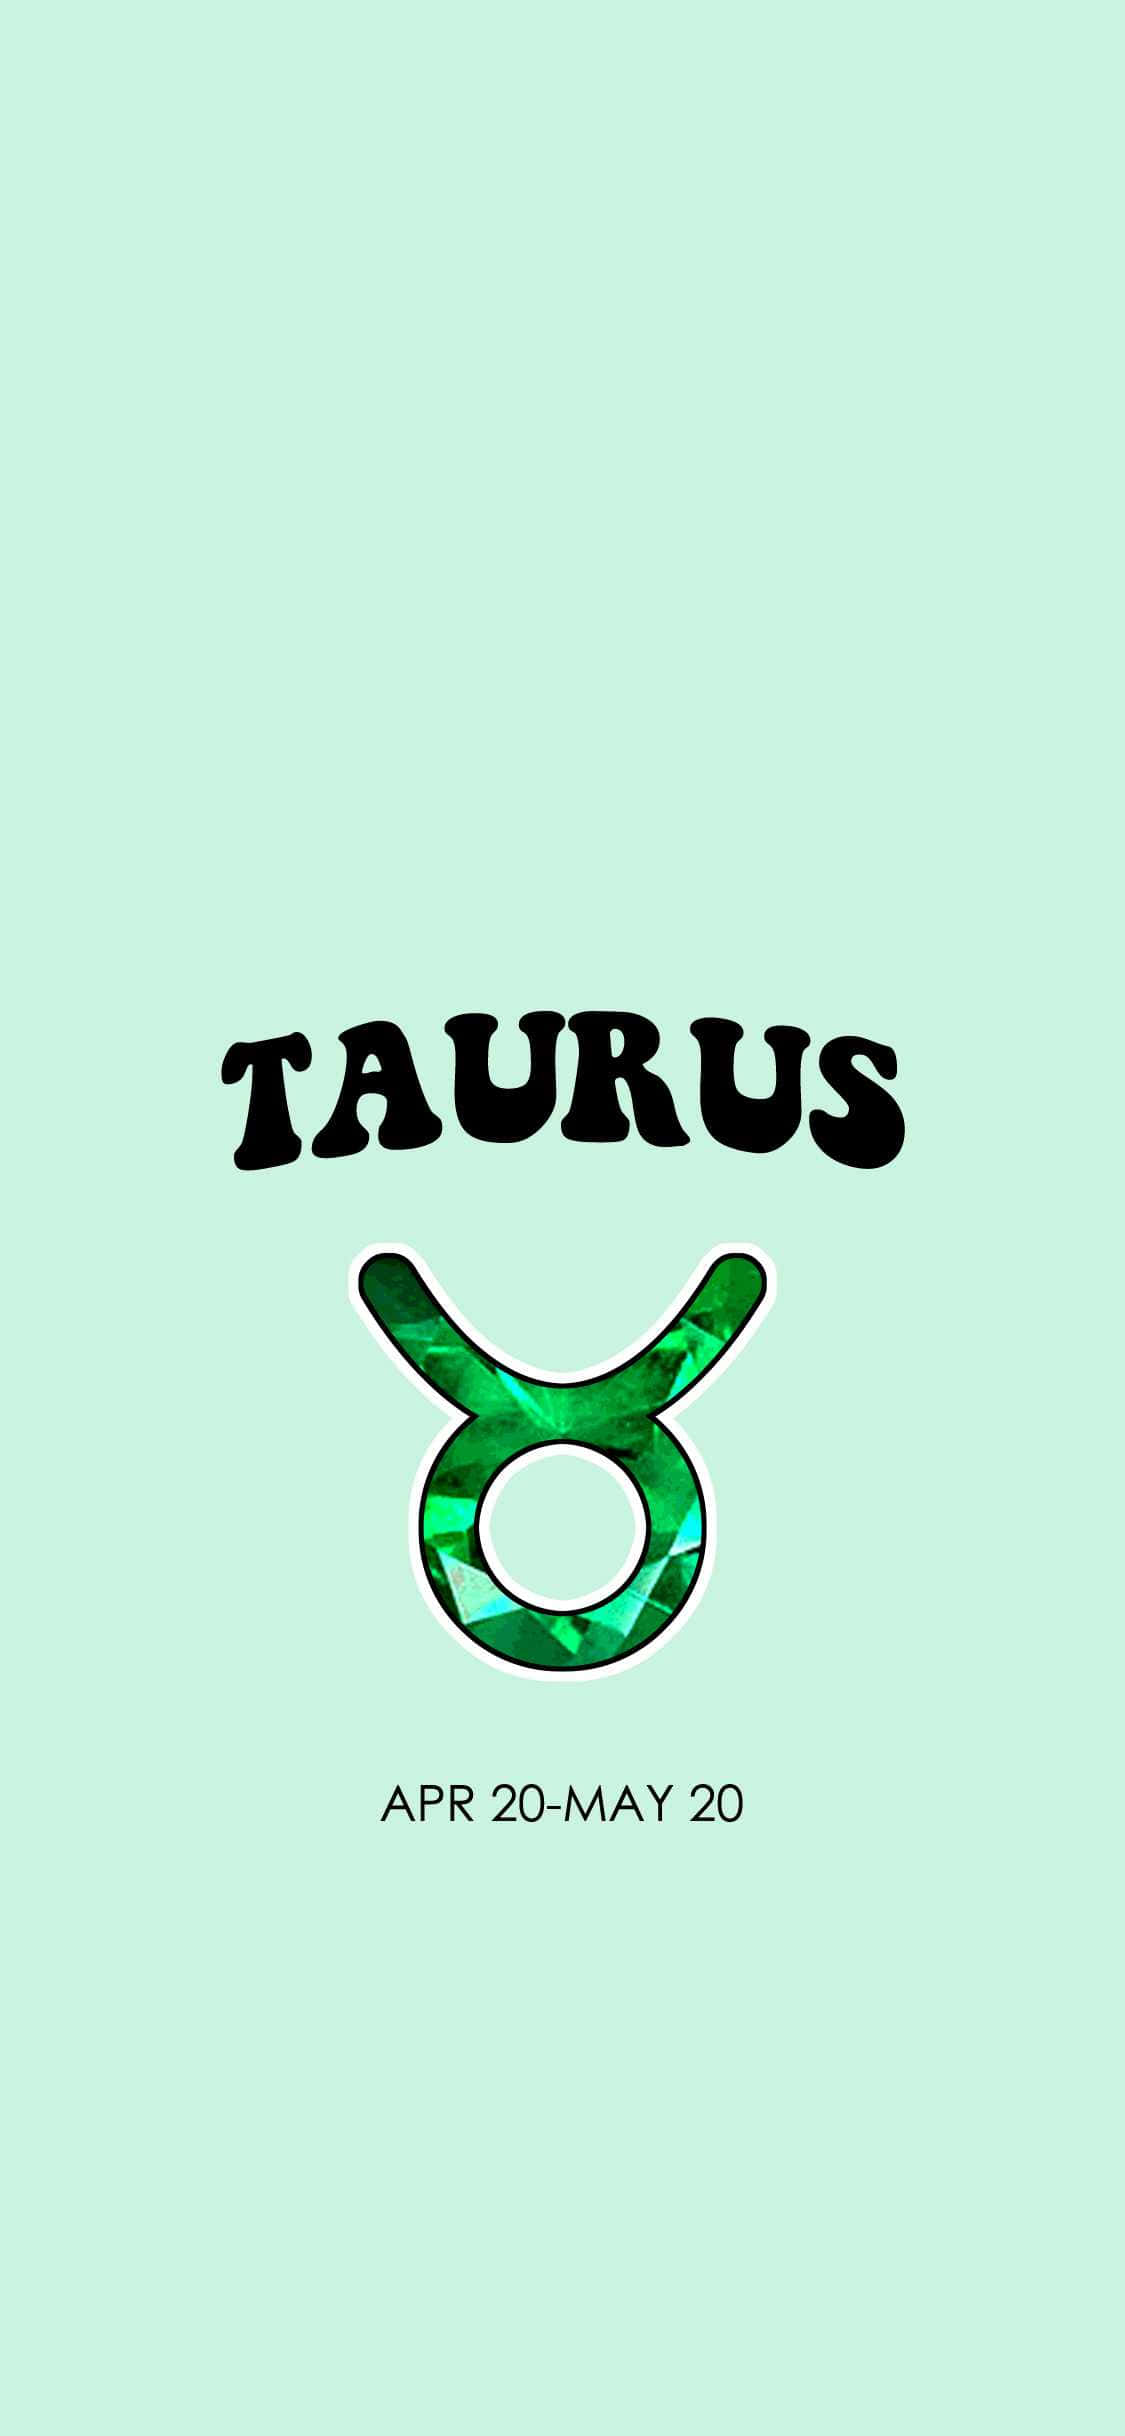 “Stretch your limits this season and make the most of being a Taurus!”